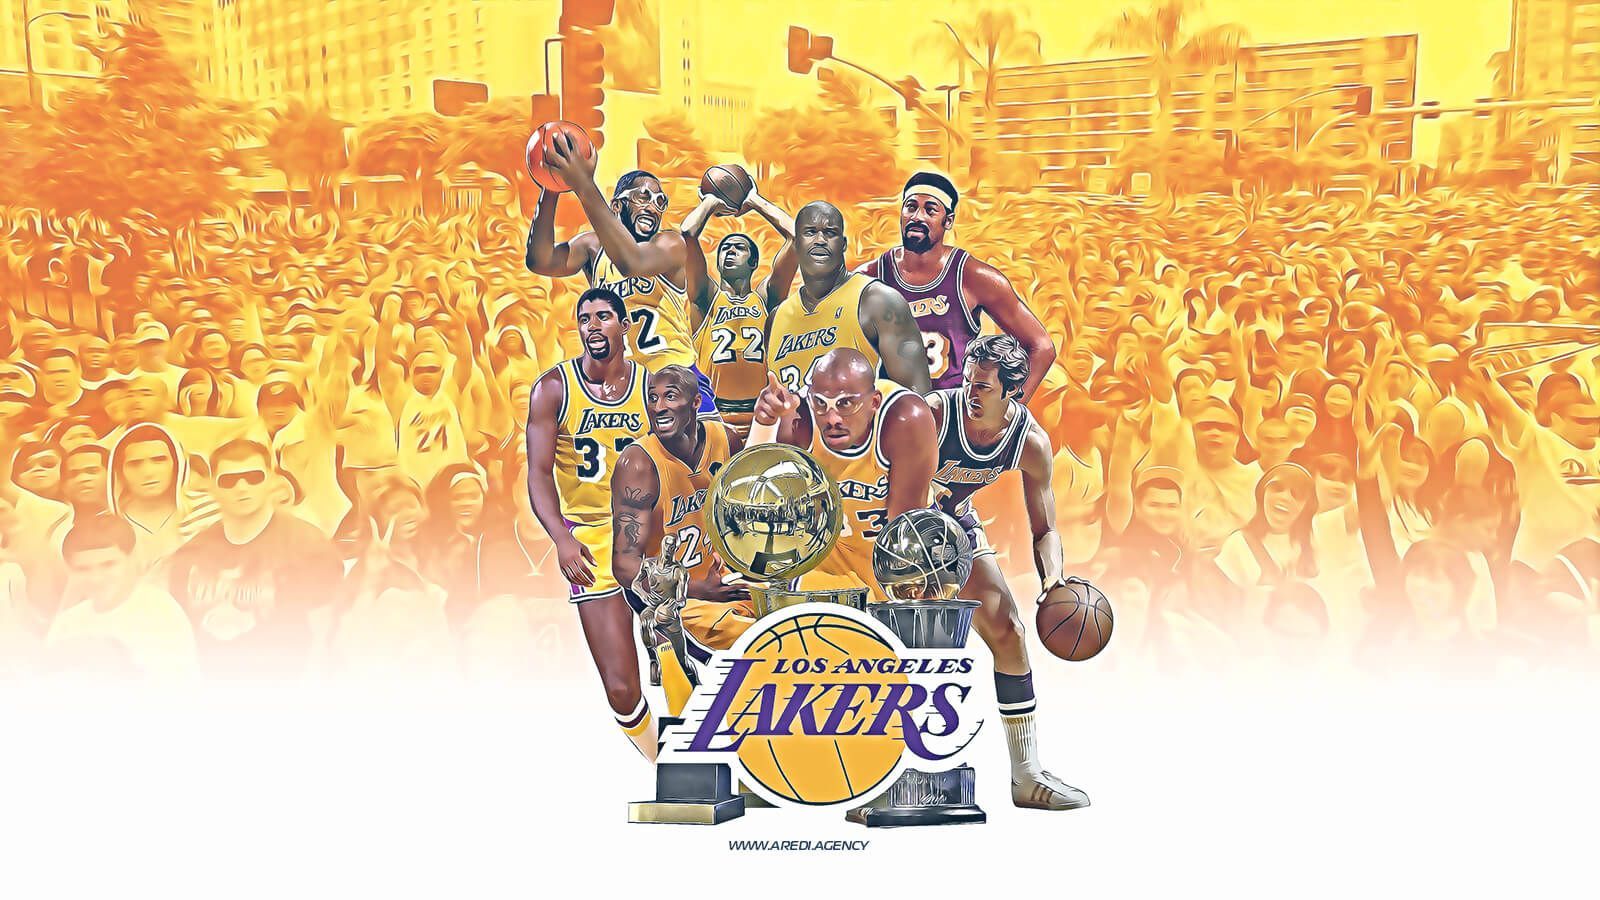 Lakers legends wallpapers